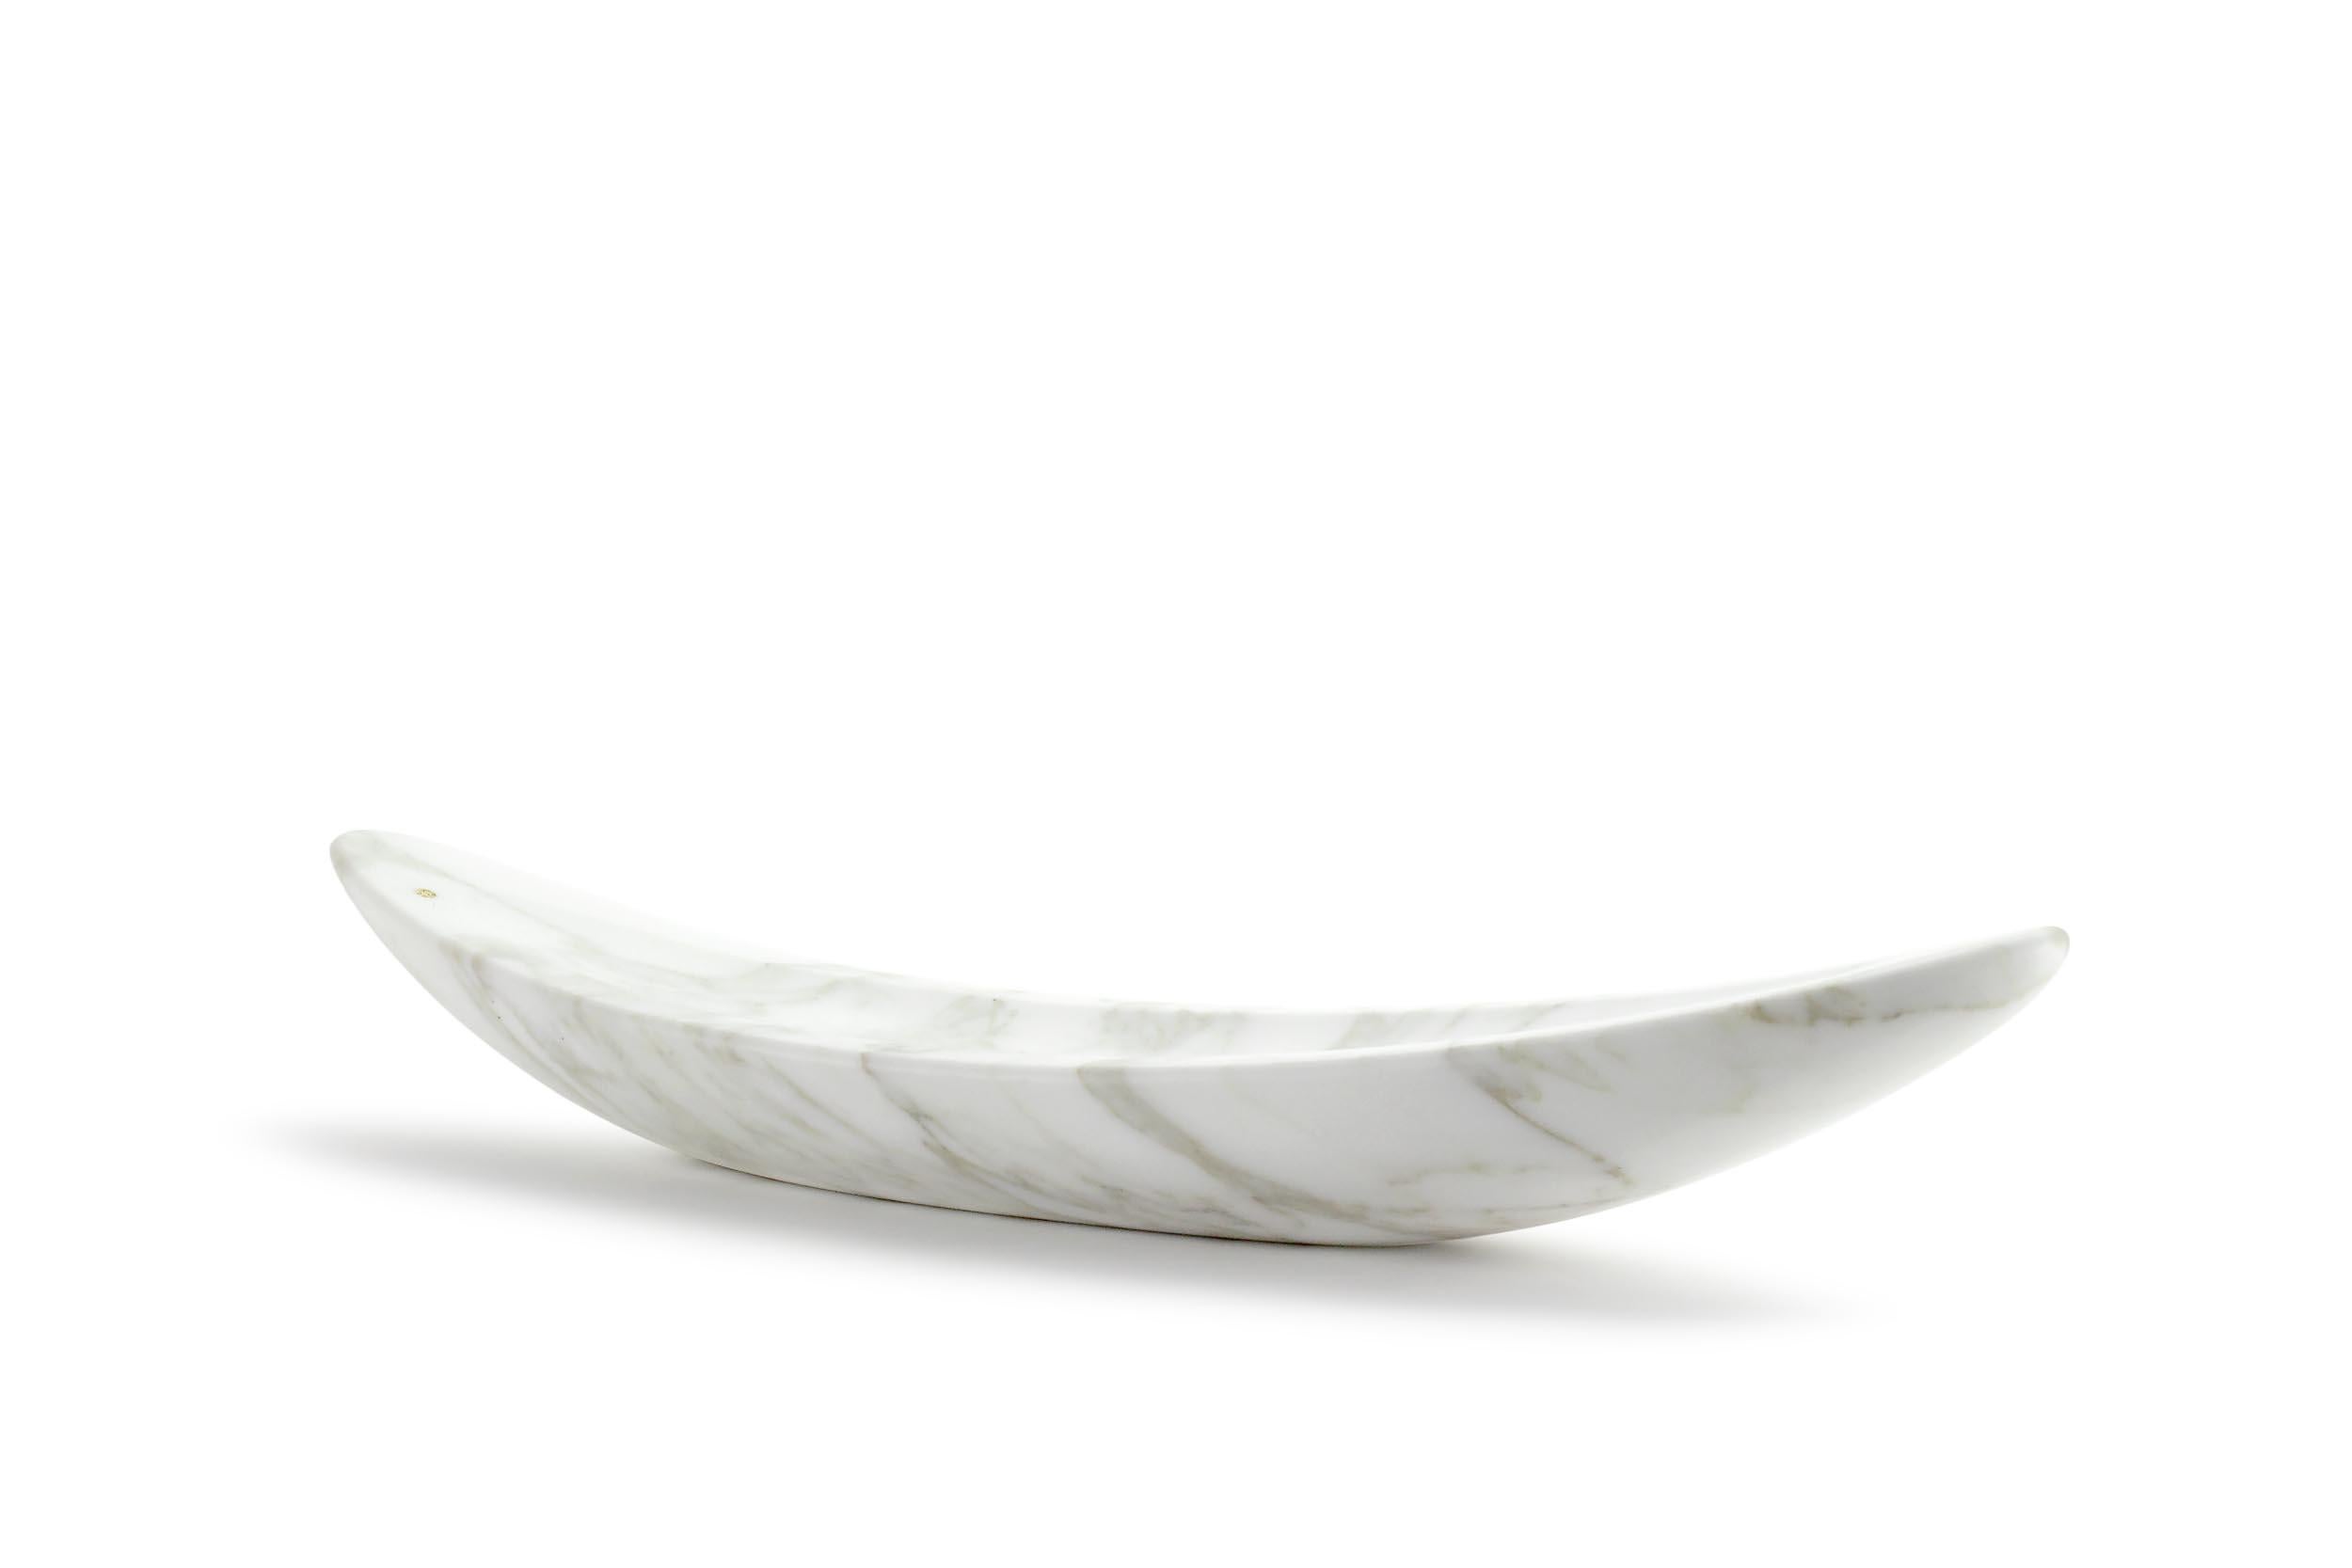 
Gondola, big elegant bowl, hand-sculpted from a solid block of Calacatta marble.

Bowl dimensions: Big L 65 x W 13 x H 11 cm, also available: Small L 55 x W 12 x H 9.5 cm.
Available in different marbles, onyx and quartzite.

100% Hand made in